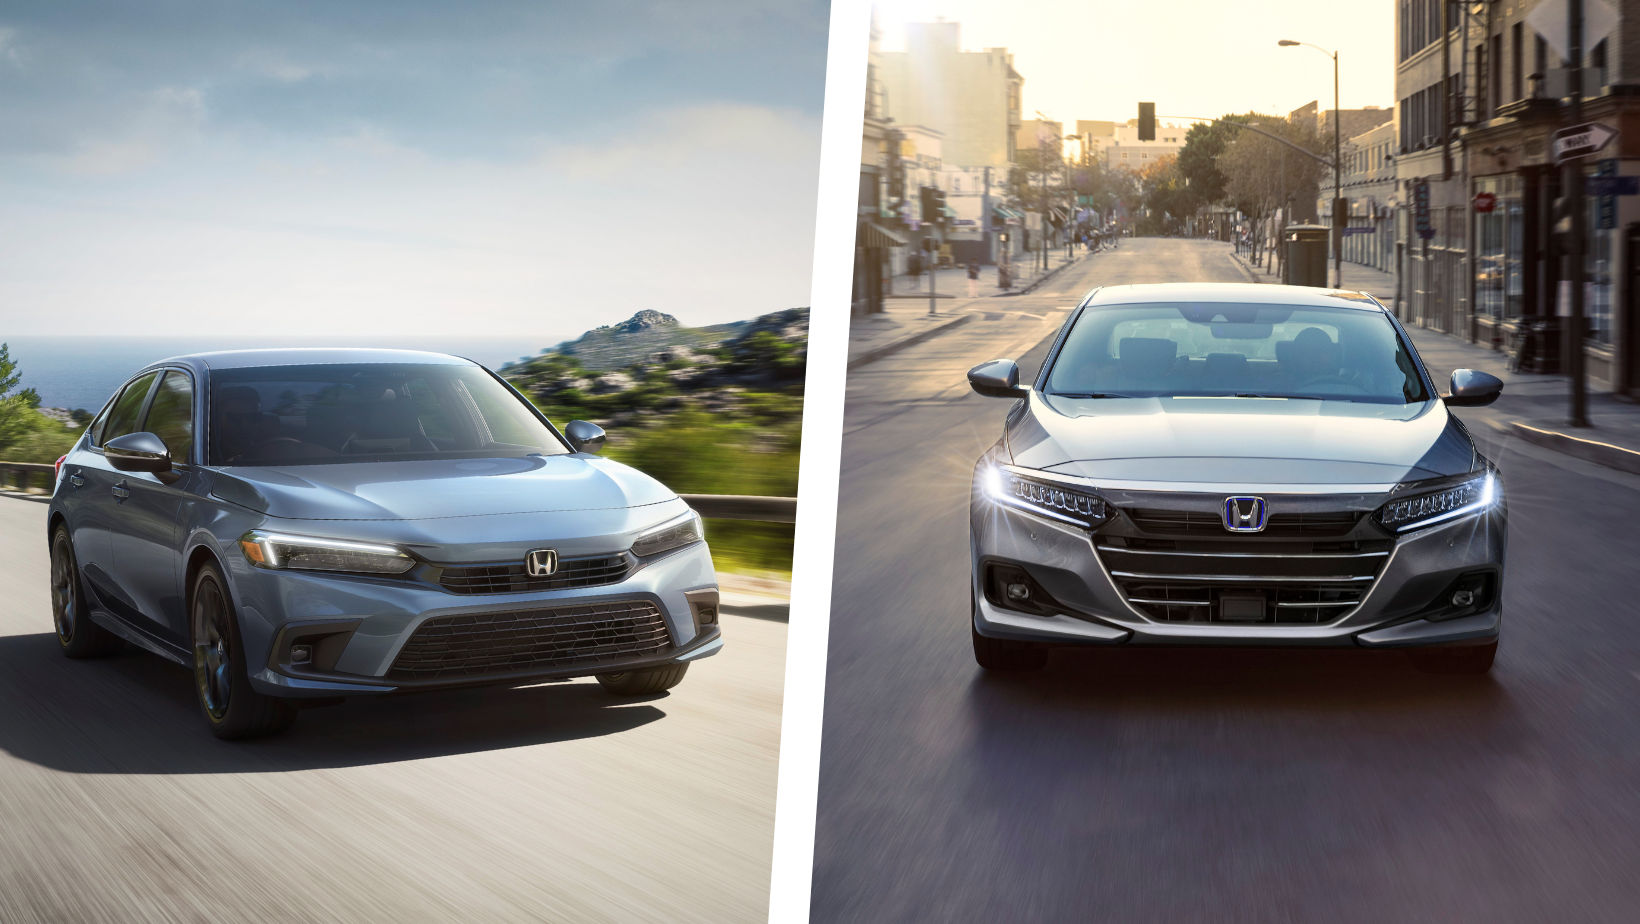 Which Honda Vehicles Are The Most Fuel Efficient?